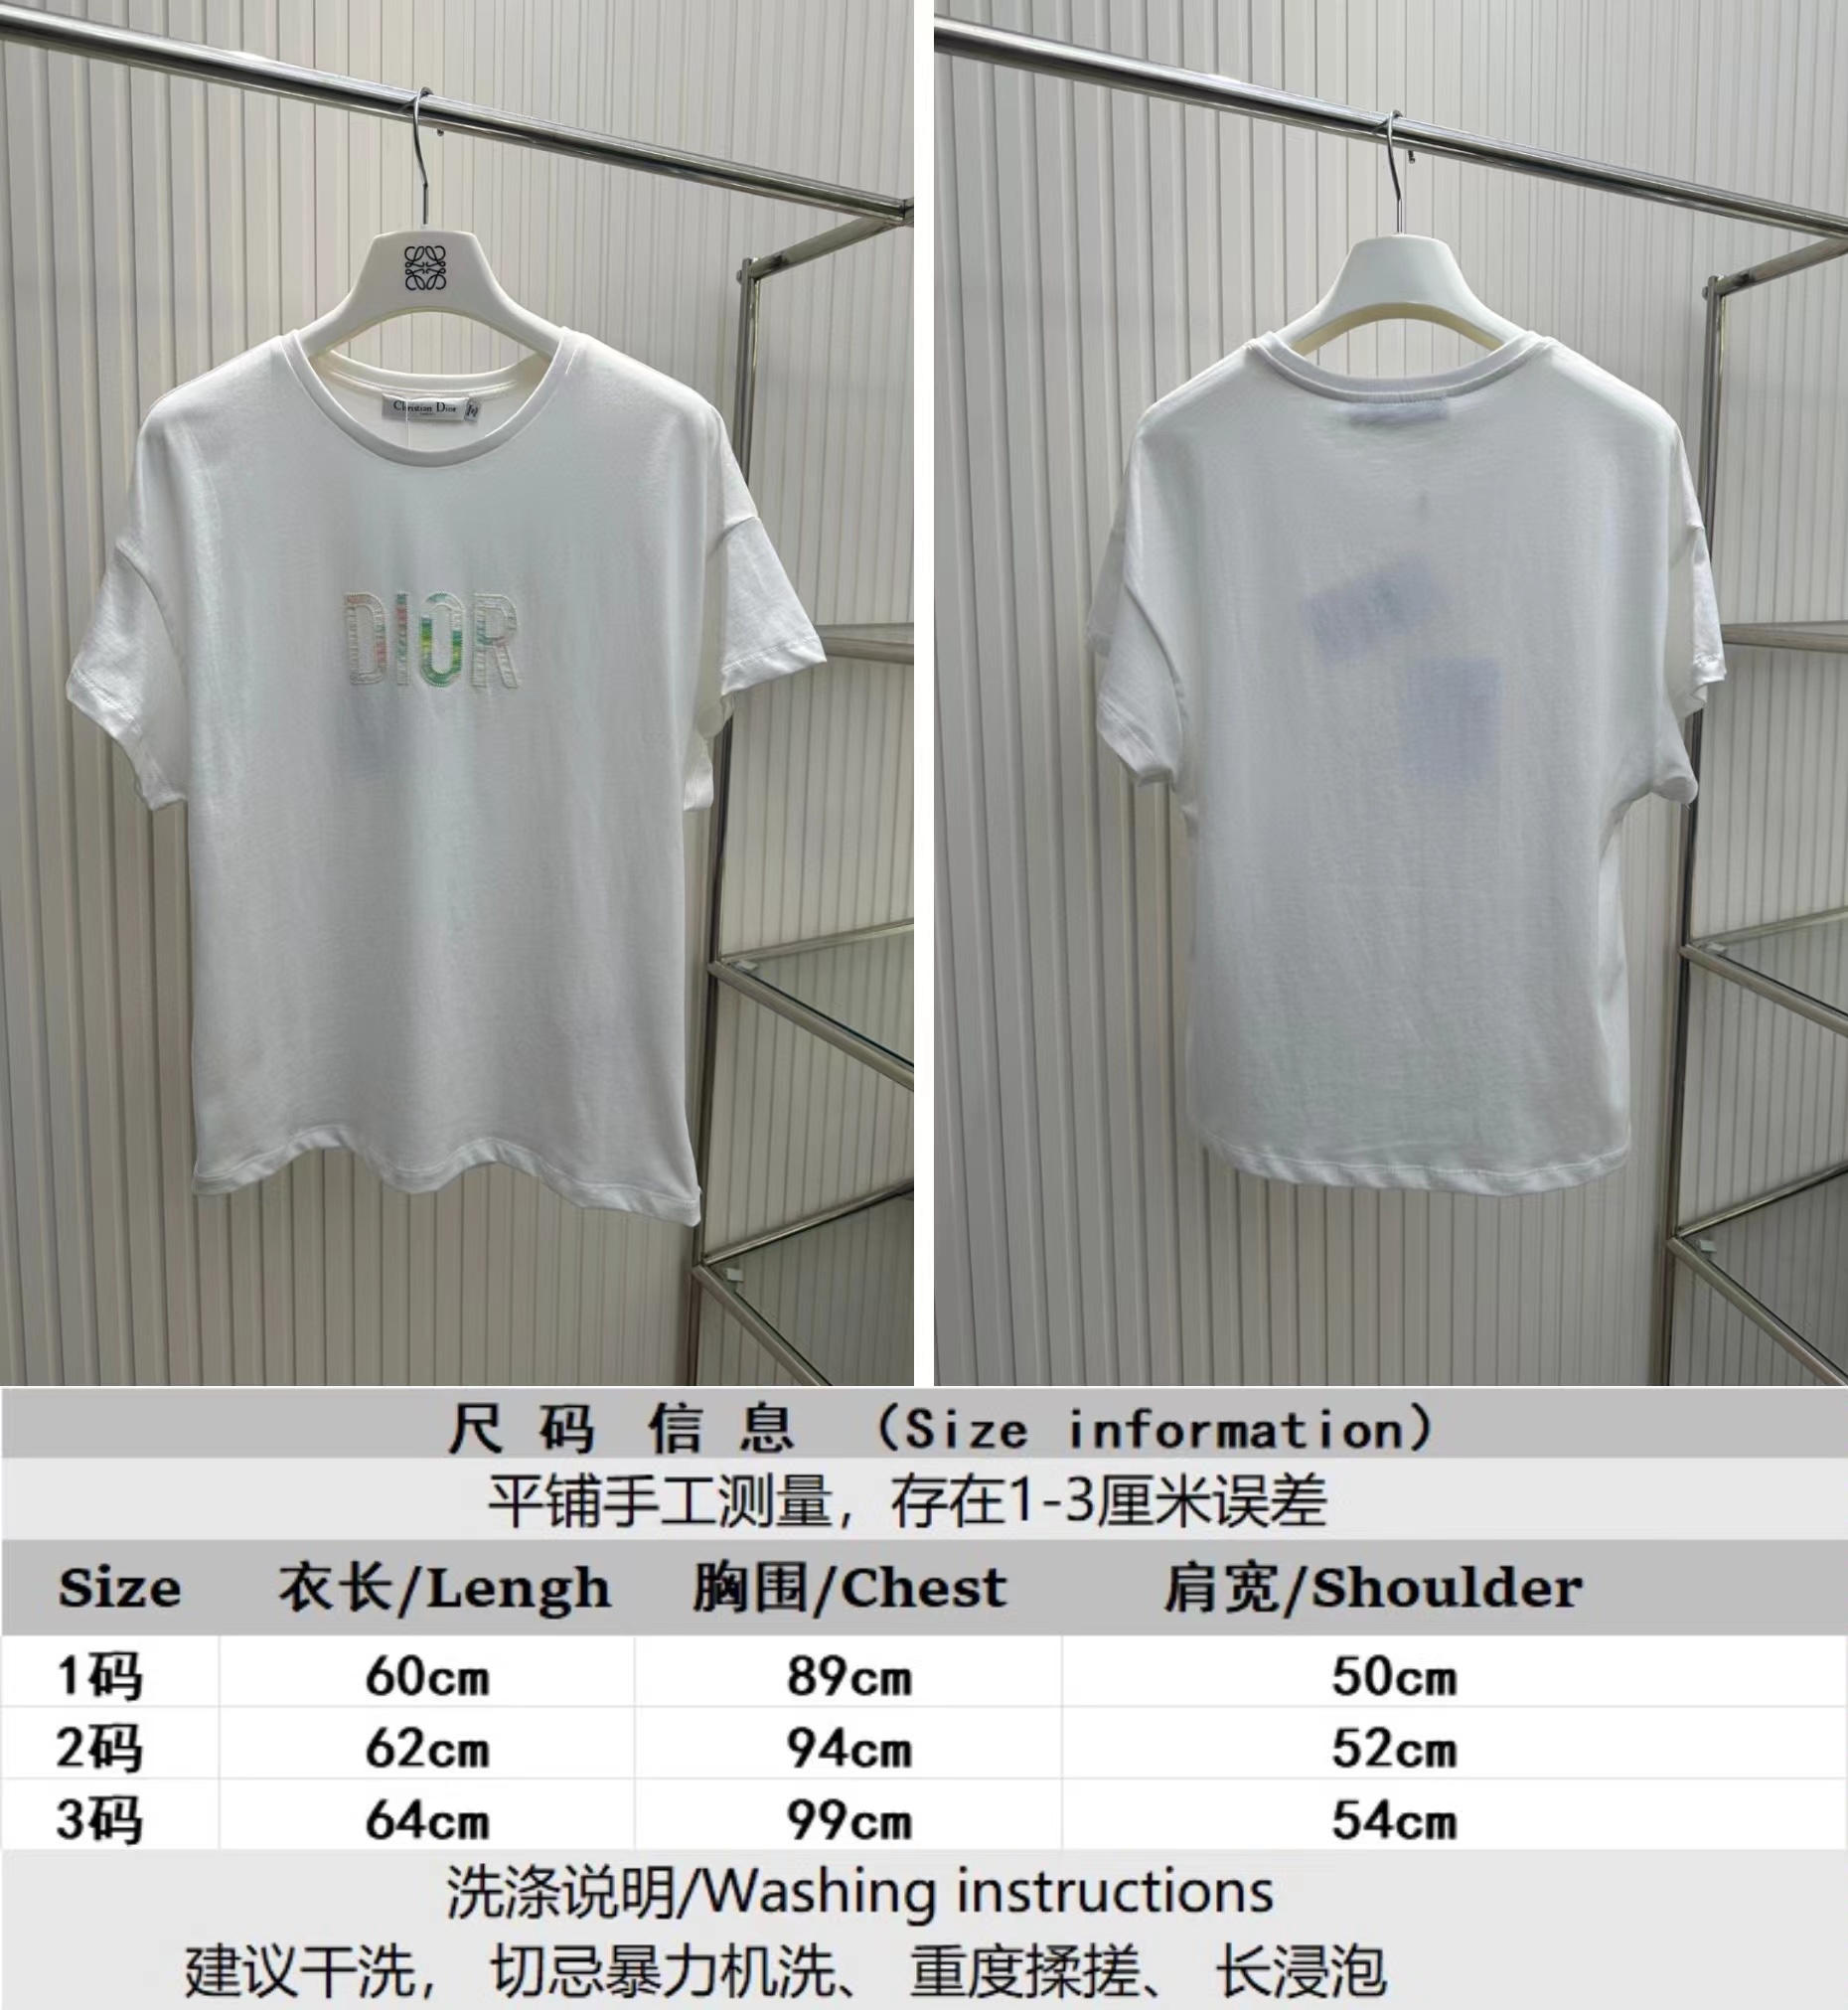 Dior Clothing T-Shirt Embroidery Short Sleeve